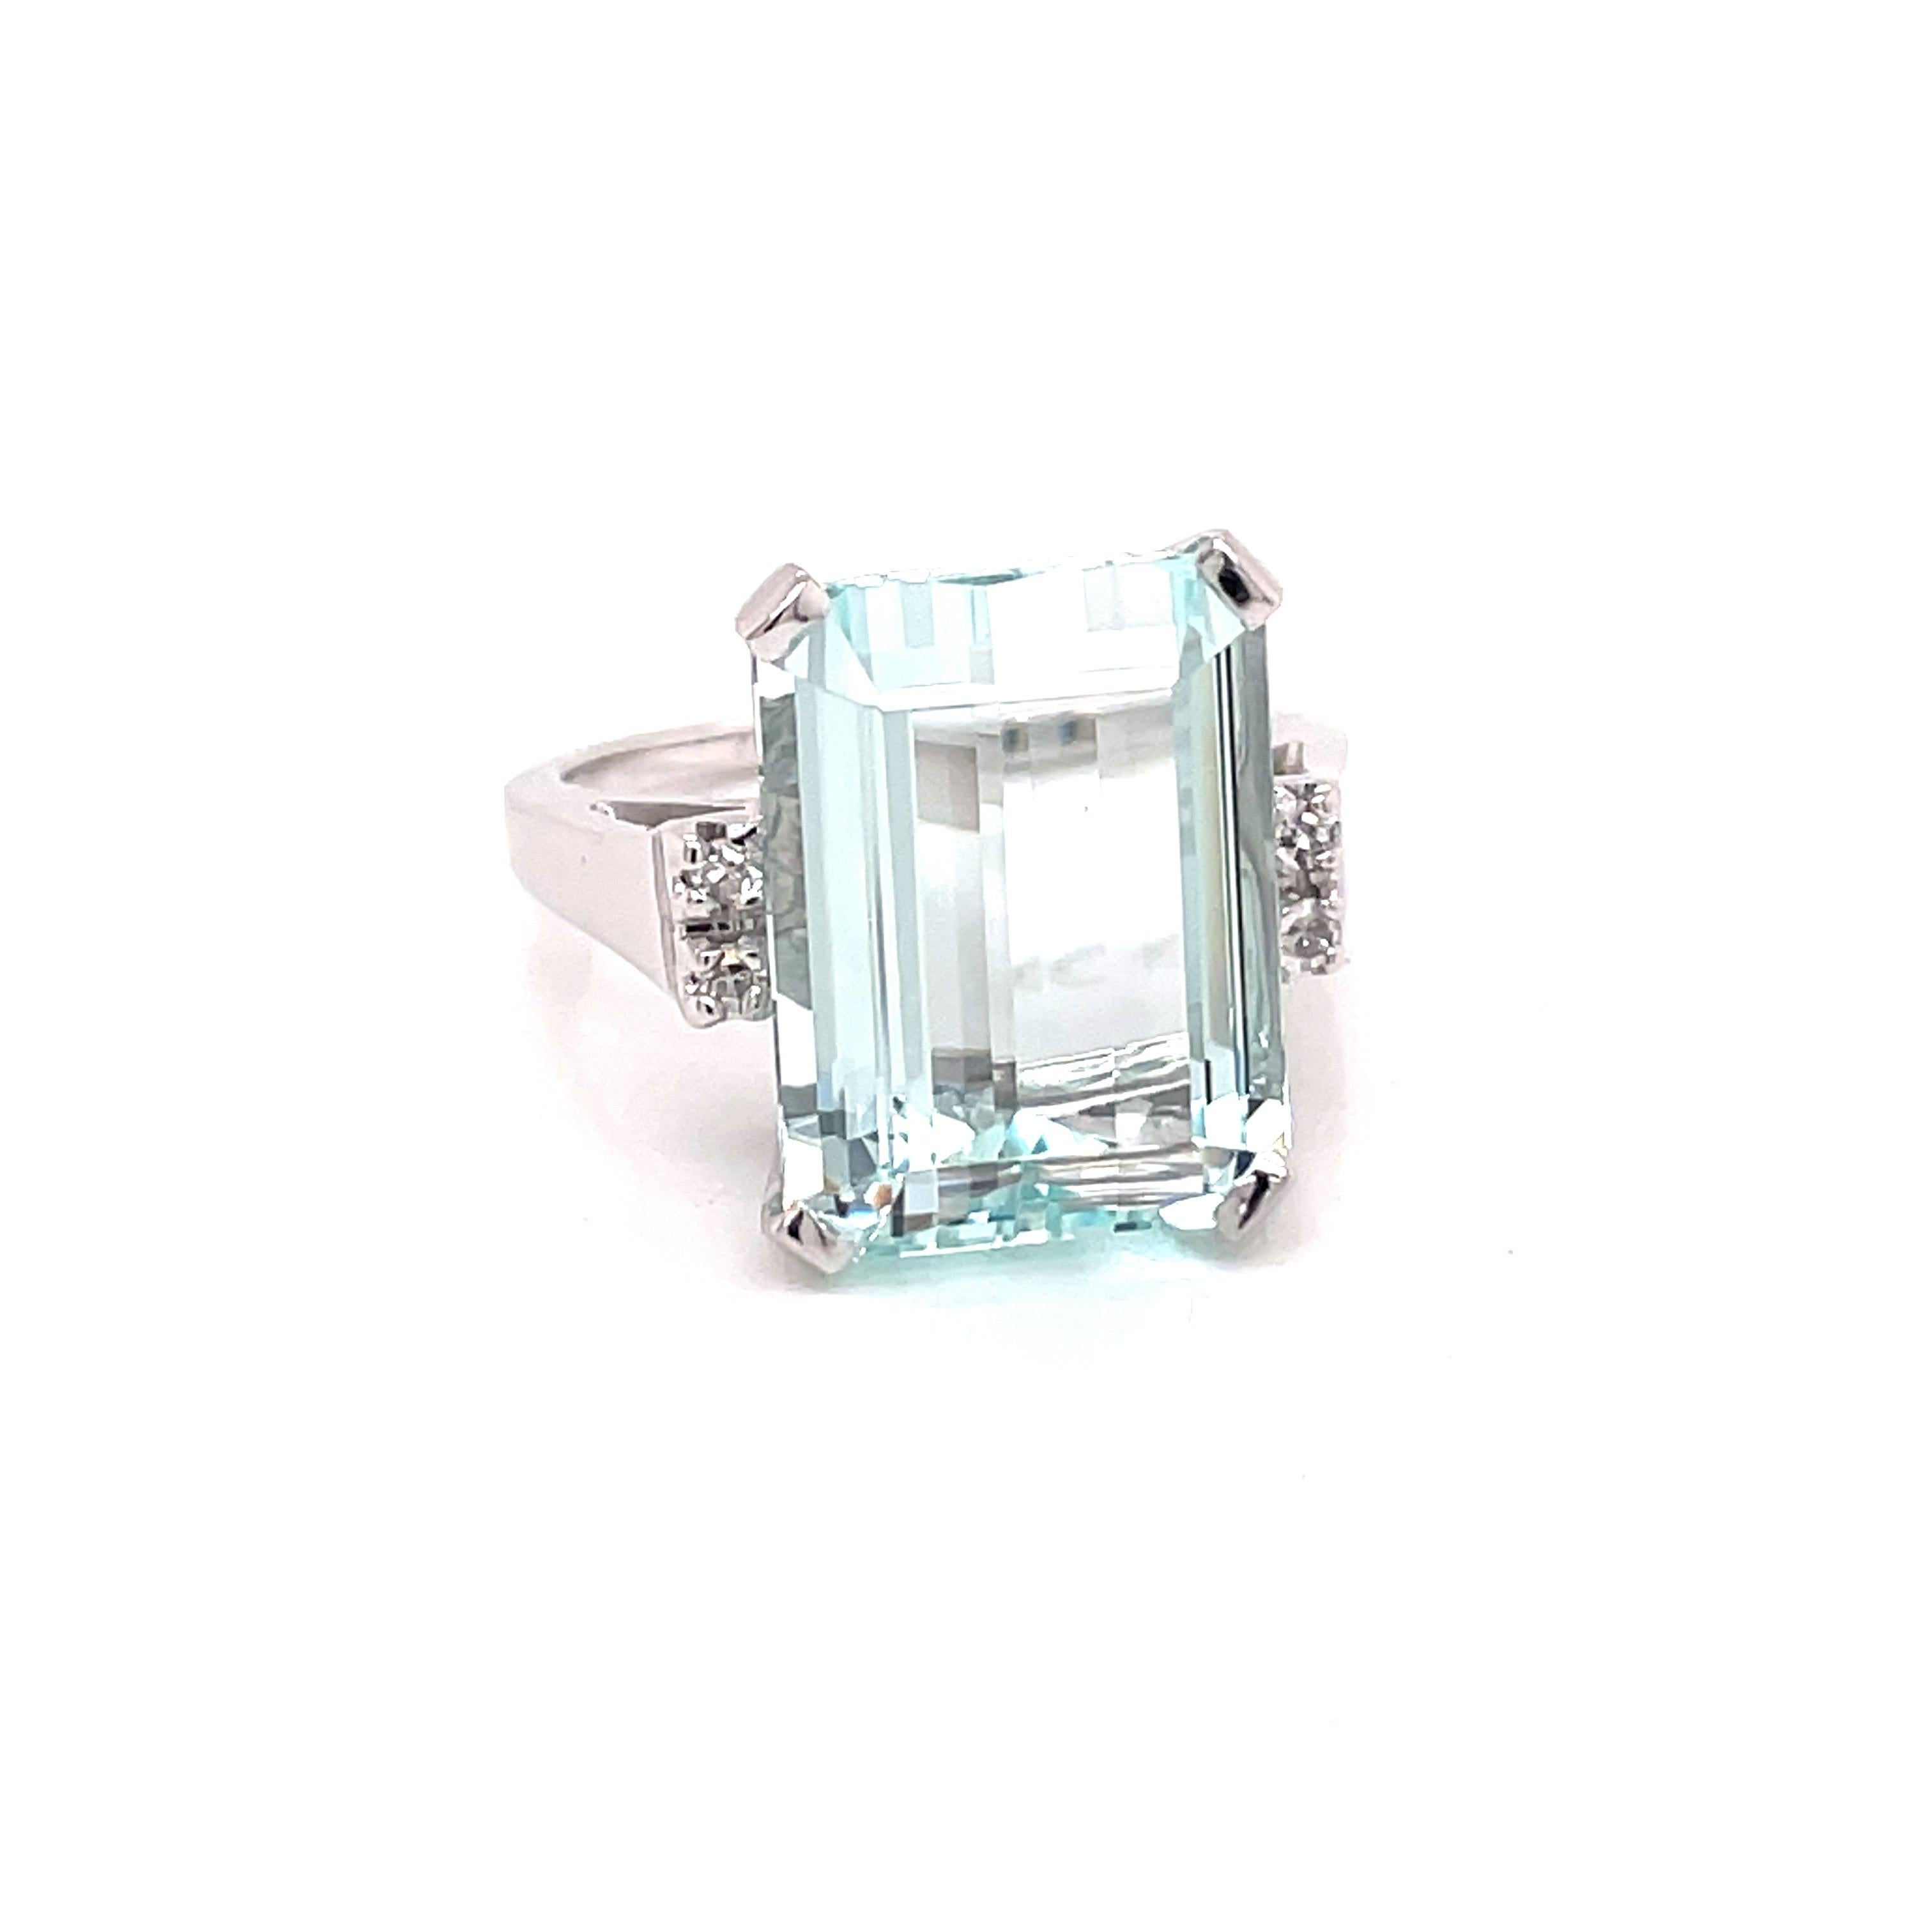 Vintage 1960's 10ct Emerald Cut Aquamarine ring with Diamonds - The aquamarine weighs approximately 10ct and measures 16 x 12mm.  It is accented with 4 single cut diamonds weighing approximately .08ct H - I color SI clarity.  The setting is 14k